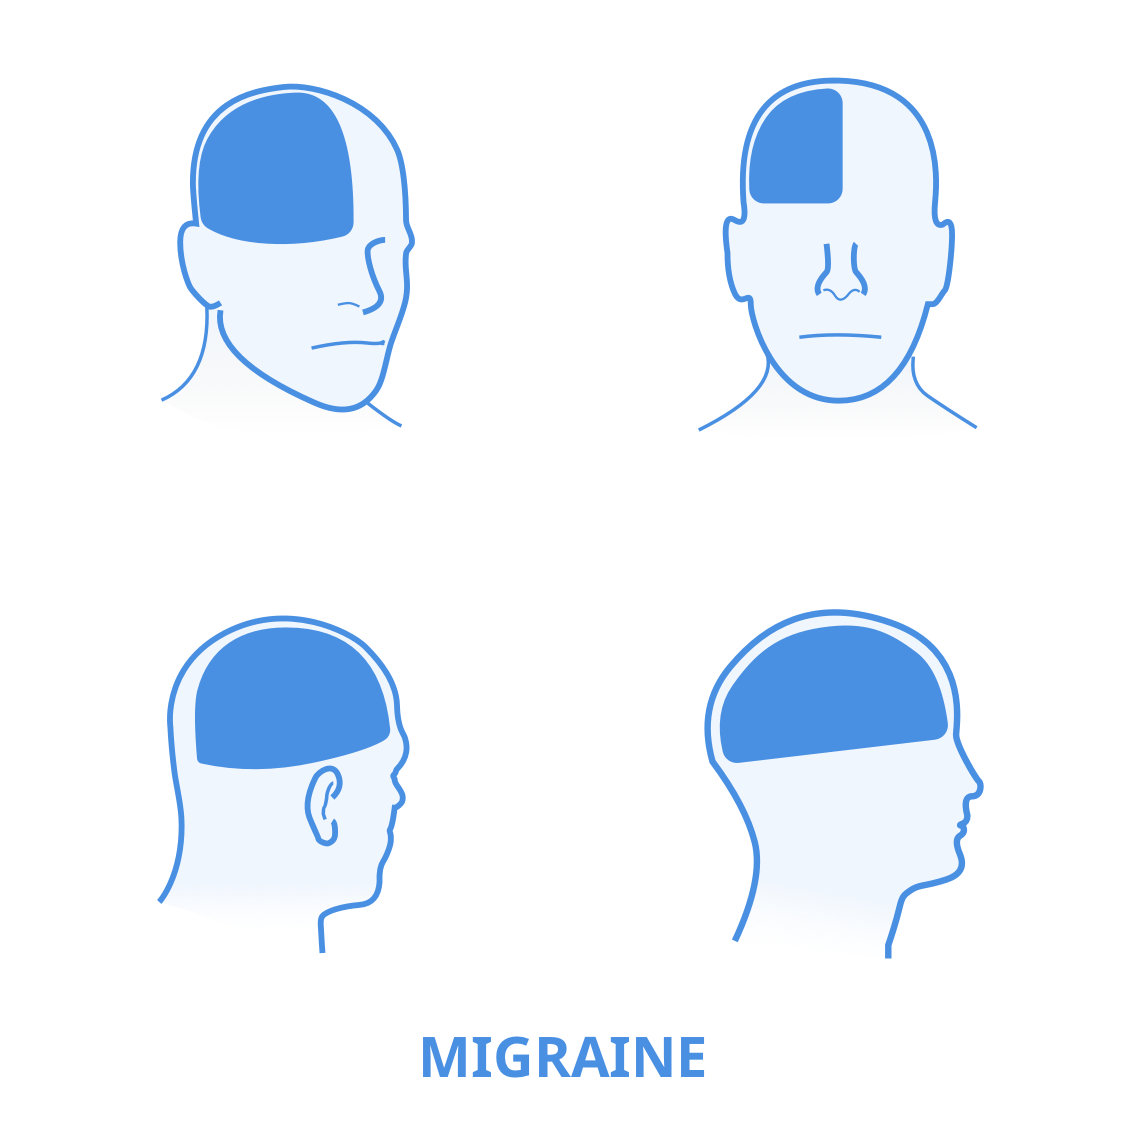 5 Types Of Headache And Their Locations